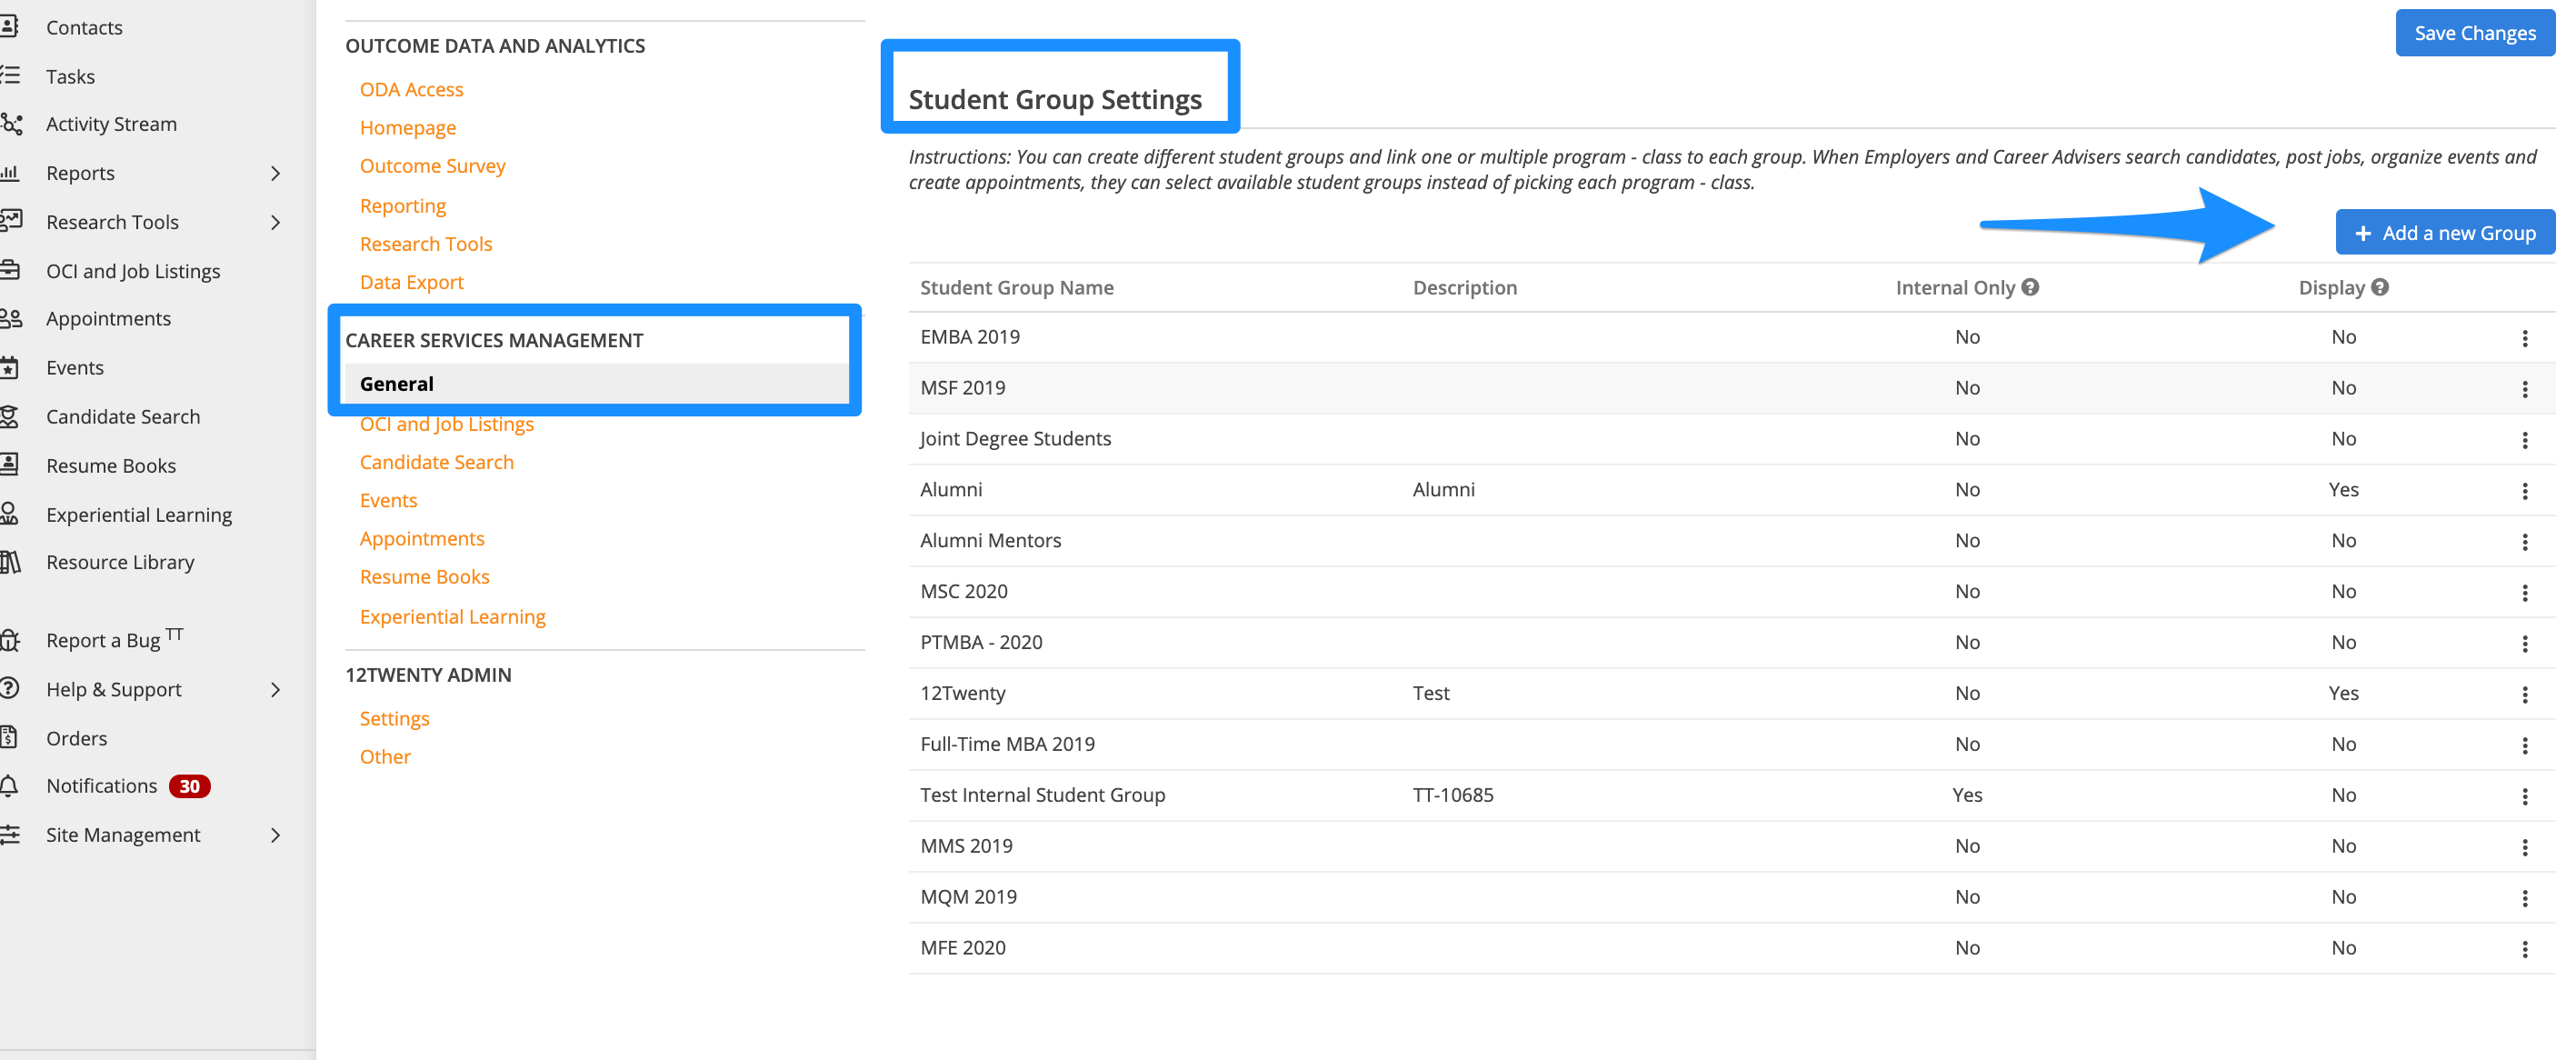 The image shows the Site Settings for Career Services Management, where Student Group Settings can be adjusted from the General tab, with an arrow pointing at the "+Add a new Group" button.